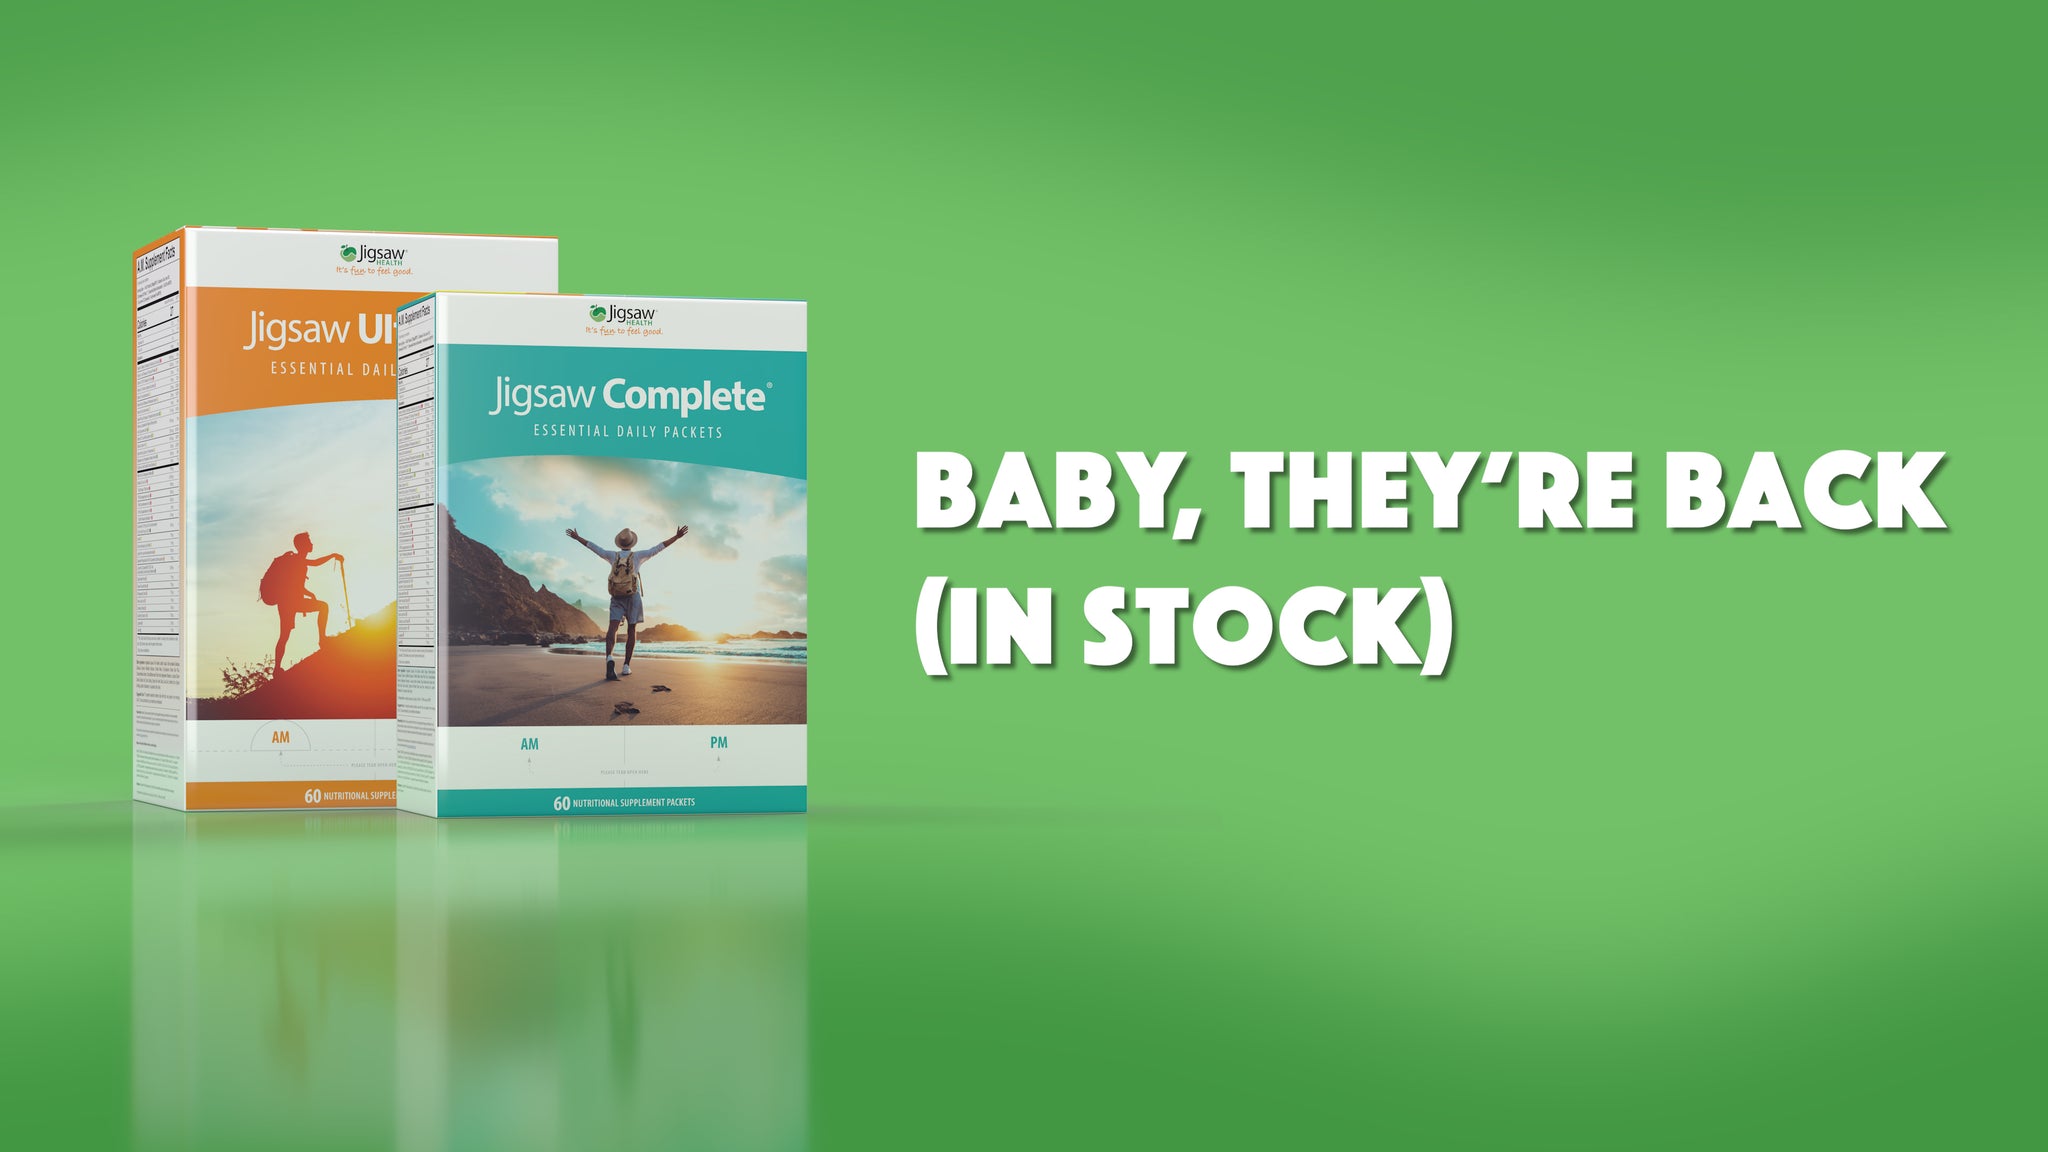 Baby, They're Back in Stock: Jigsaw Complete and Ultimate